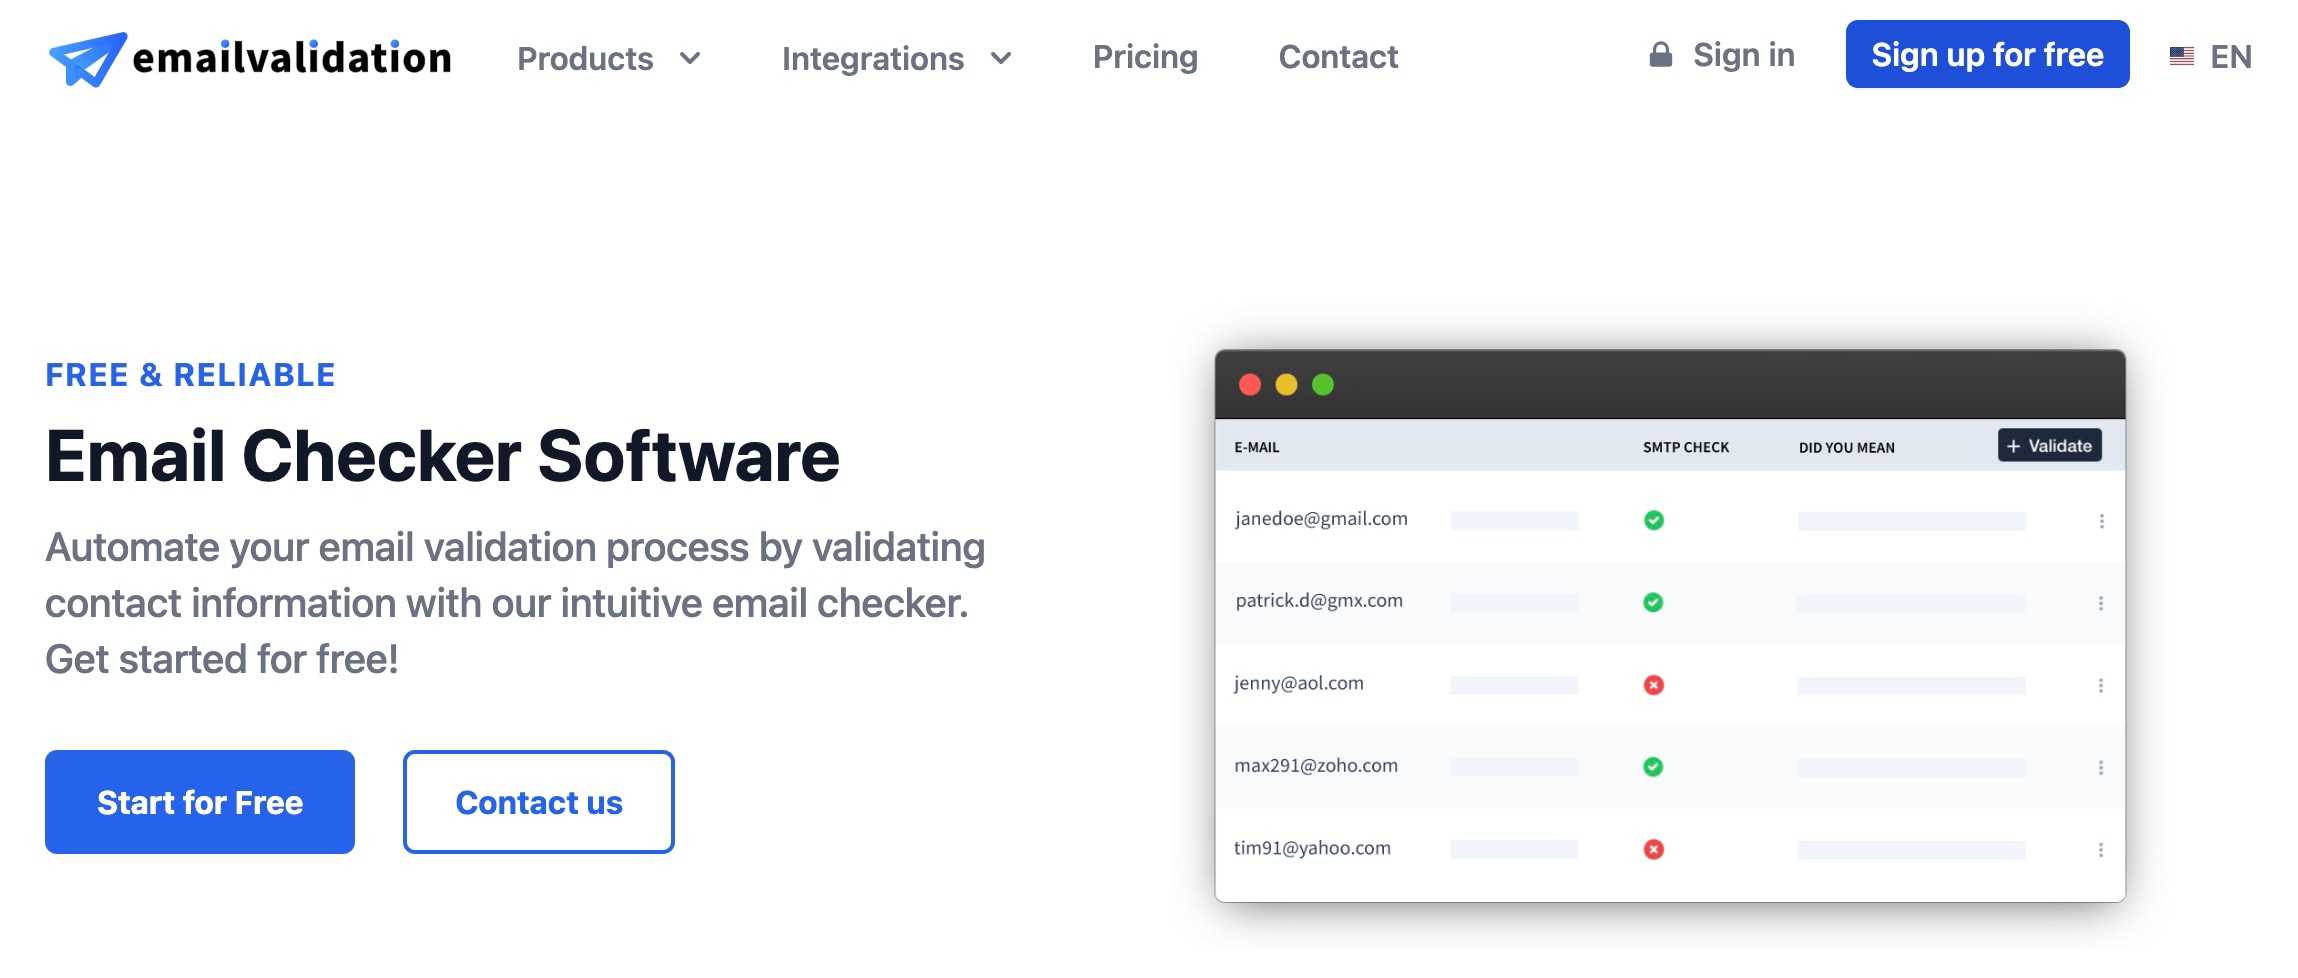 Emailvalidation.io - Has Everything You Need in Email Checker Software